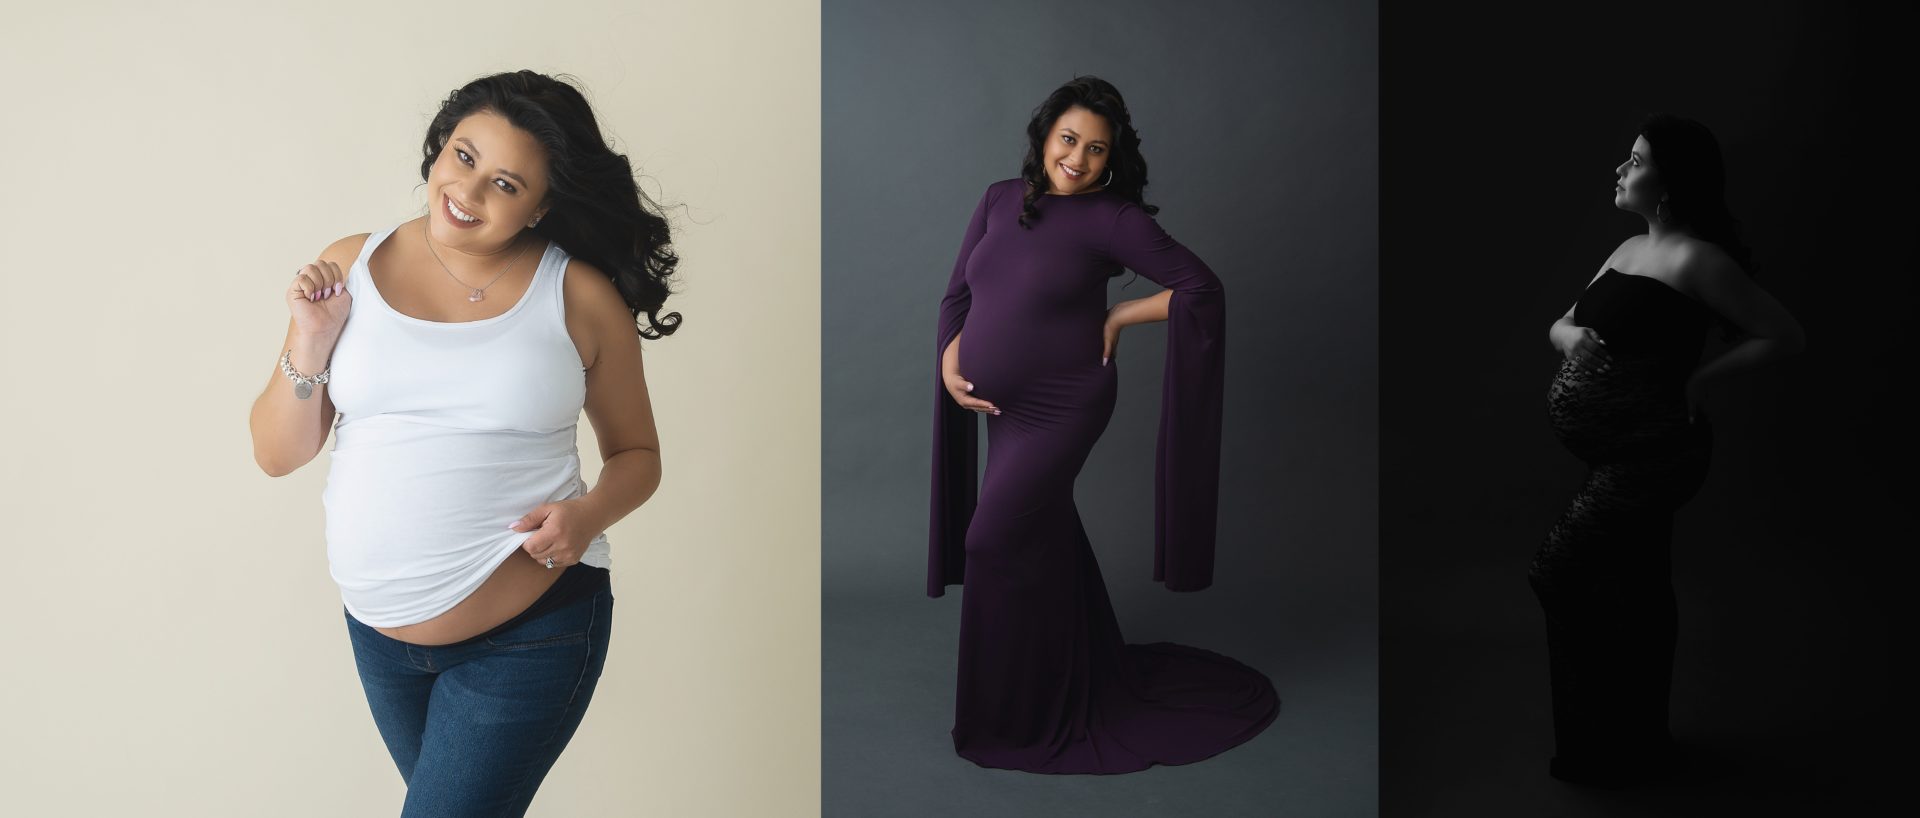 What to Expect, when Expecting a Maternity Session! - Focus Studios